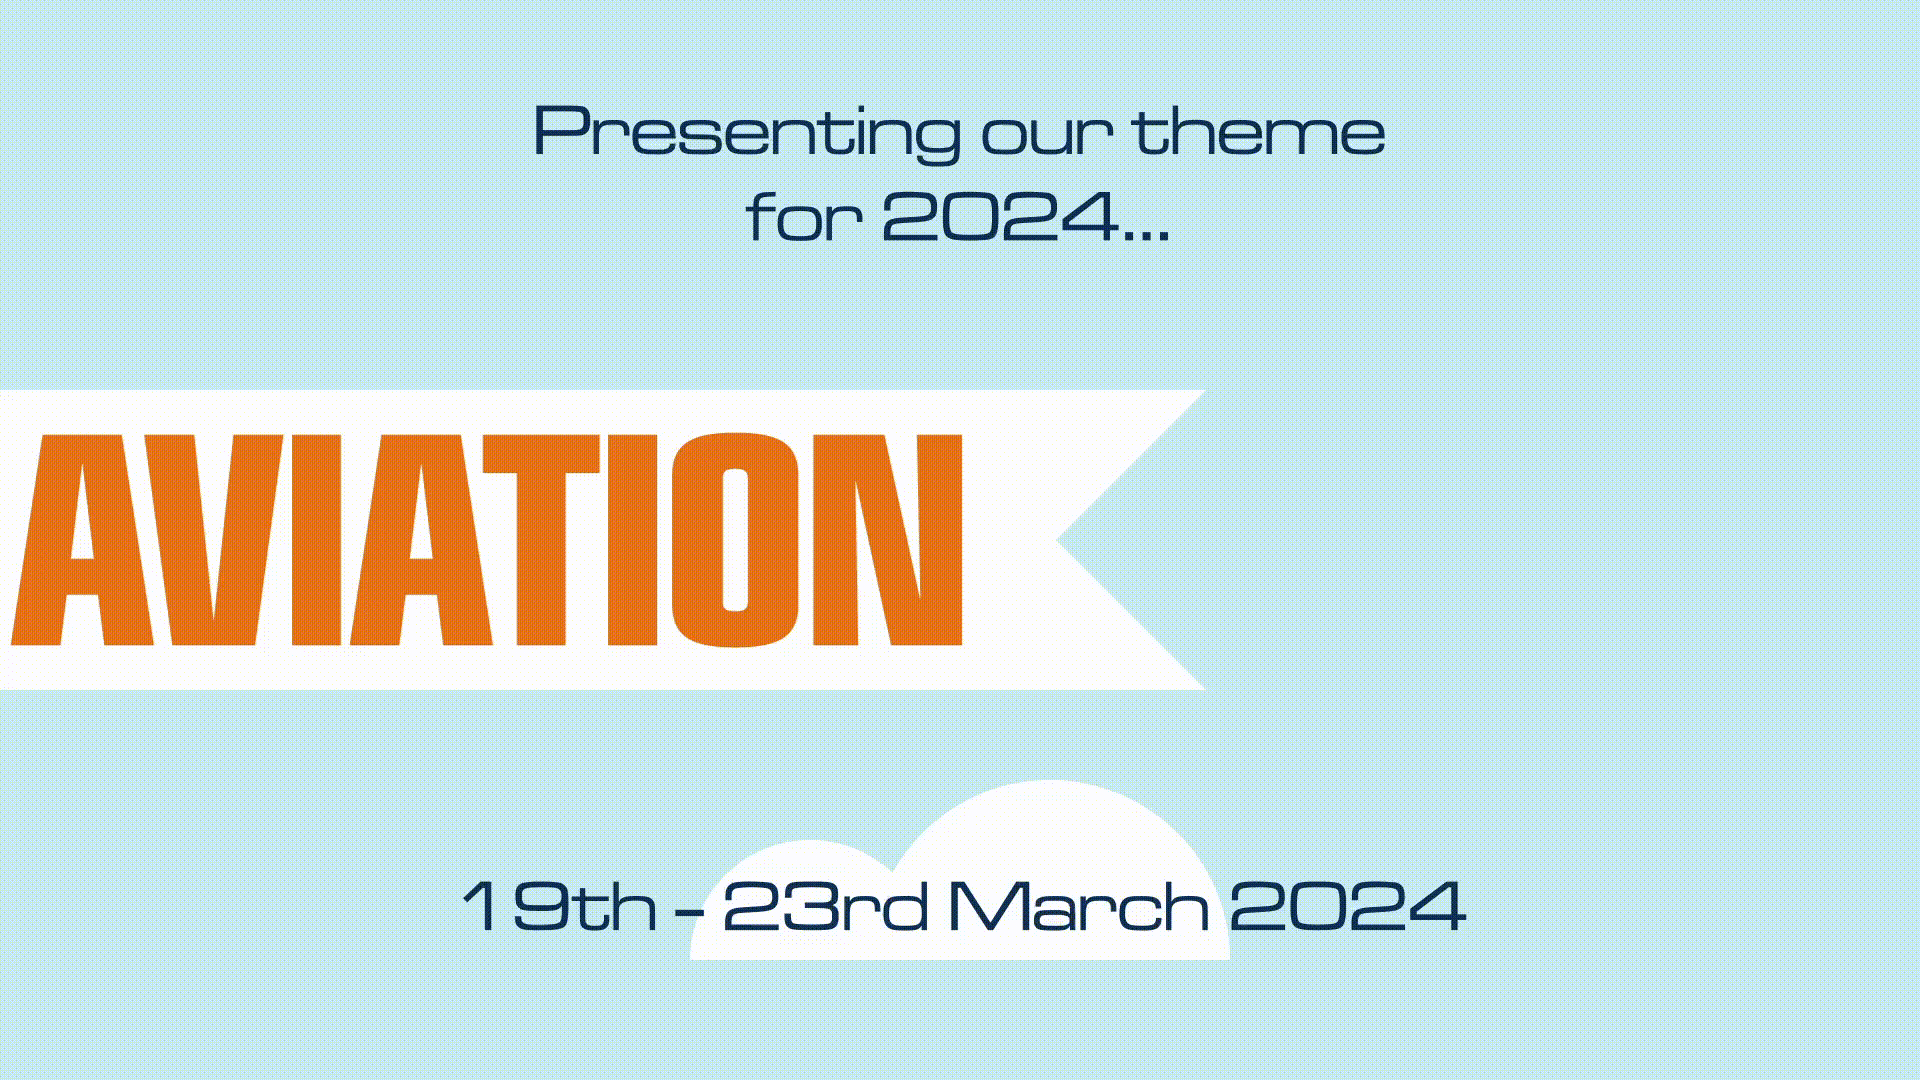 An animation for the SQLBits theme for 2024, Aviation, coming to life